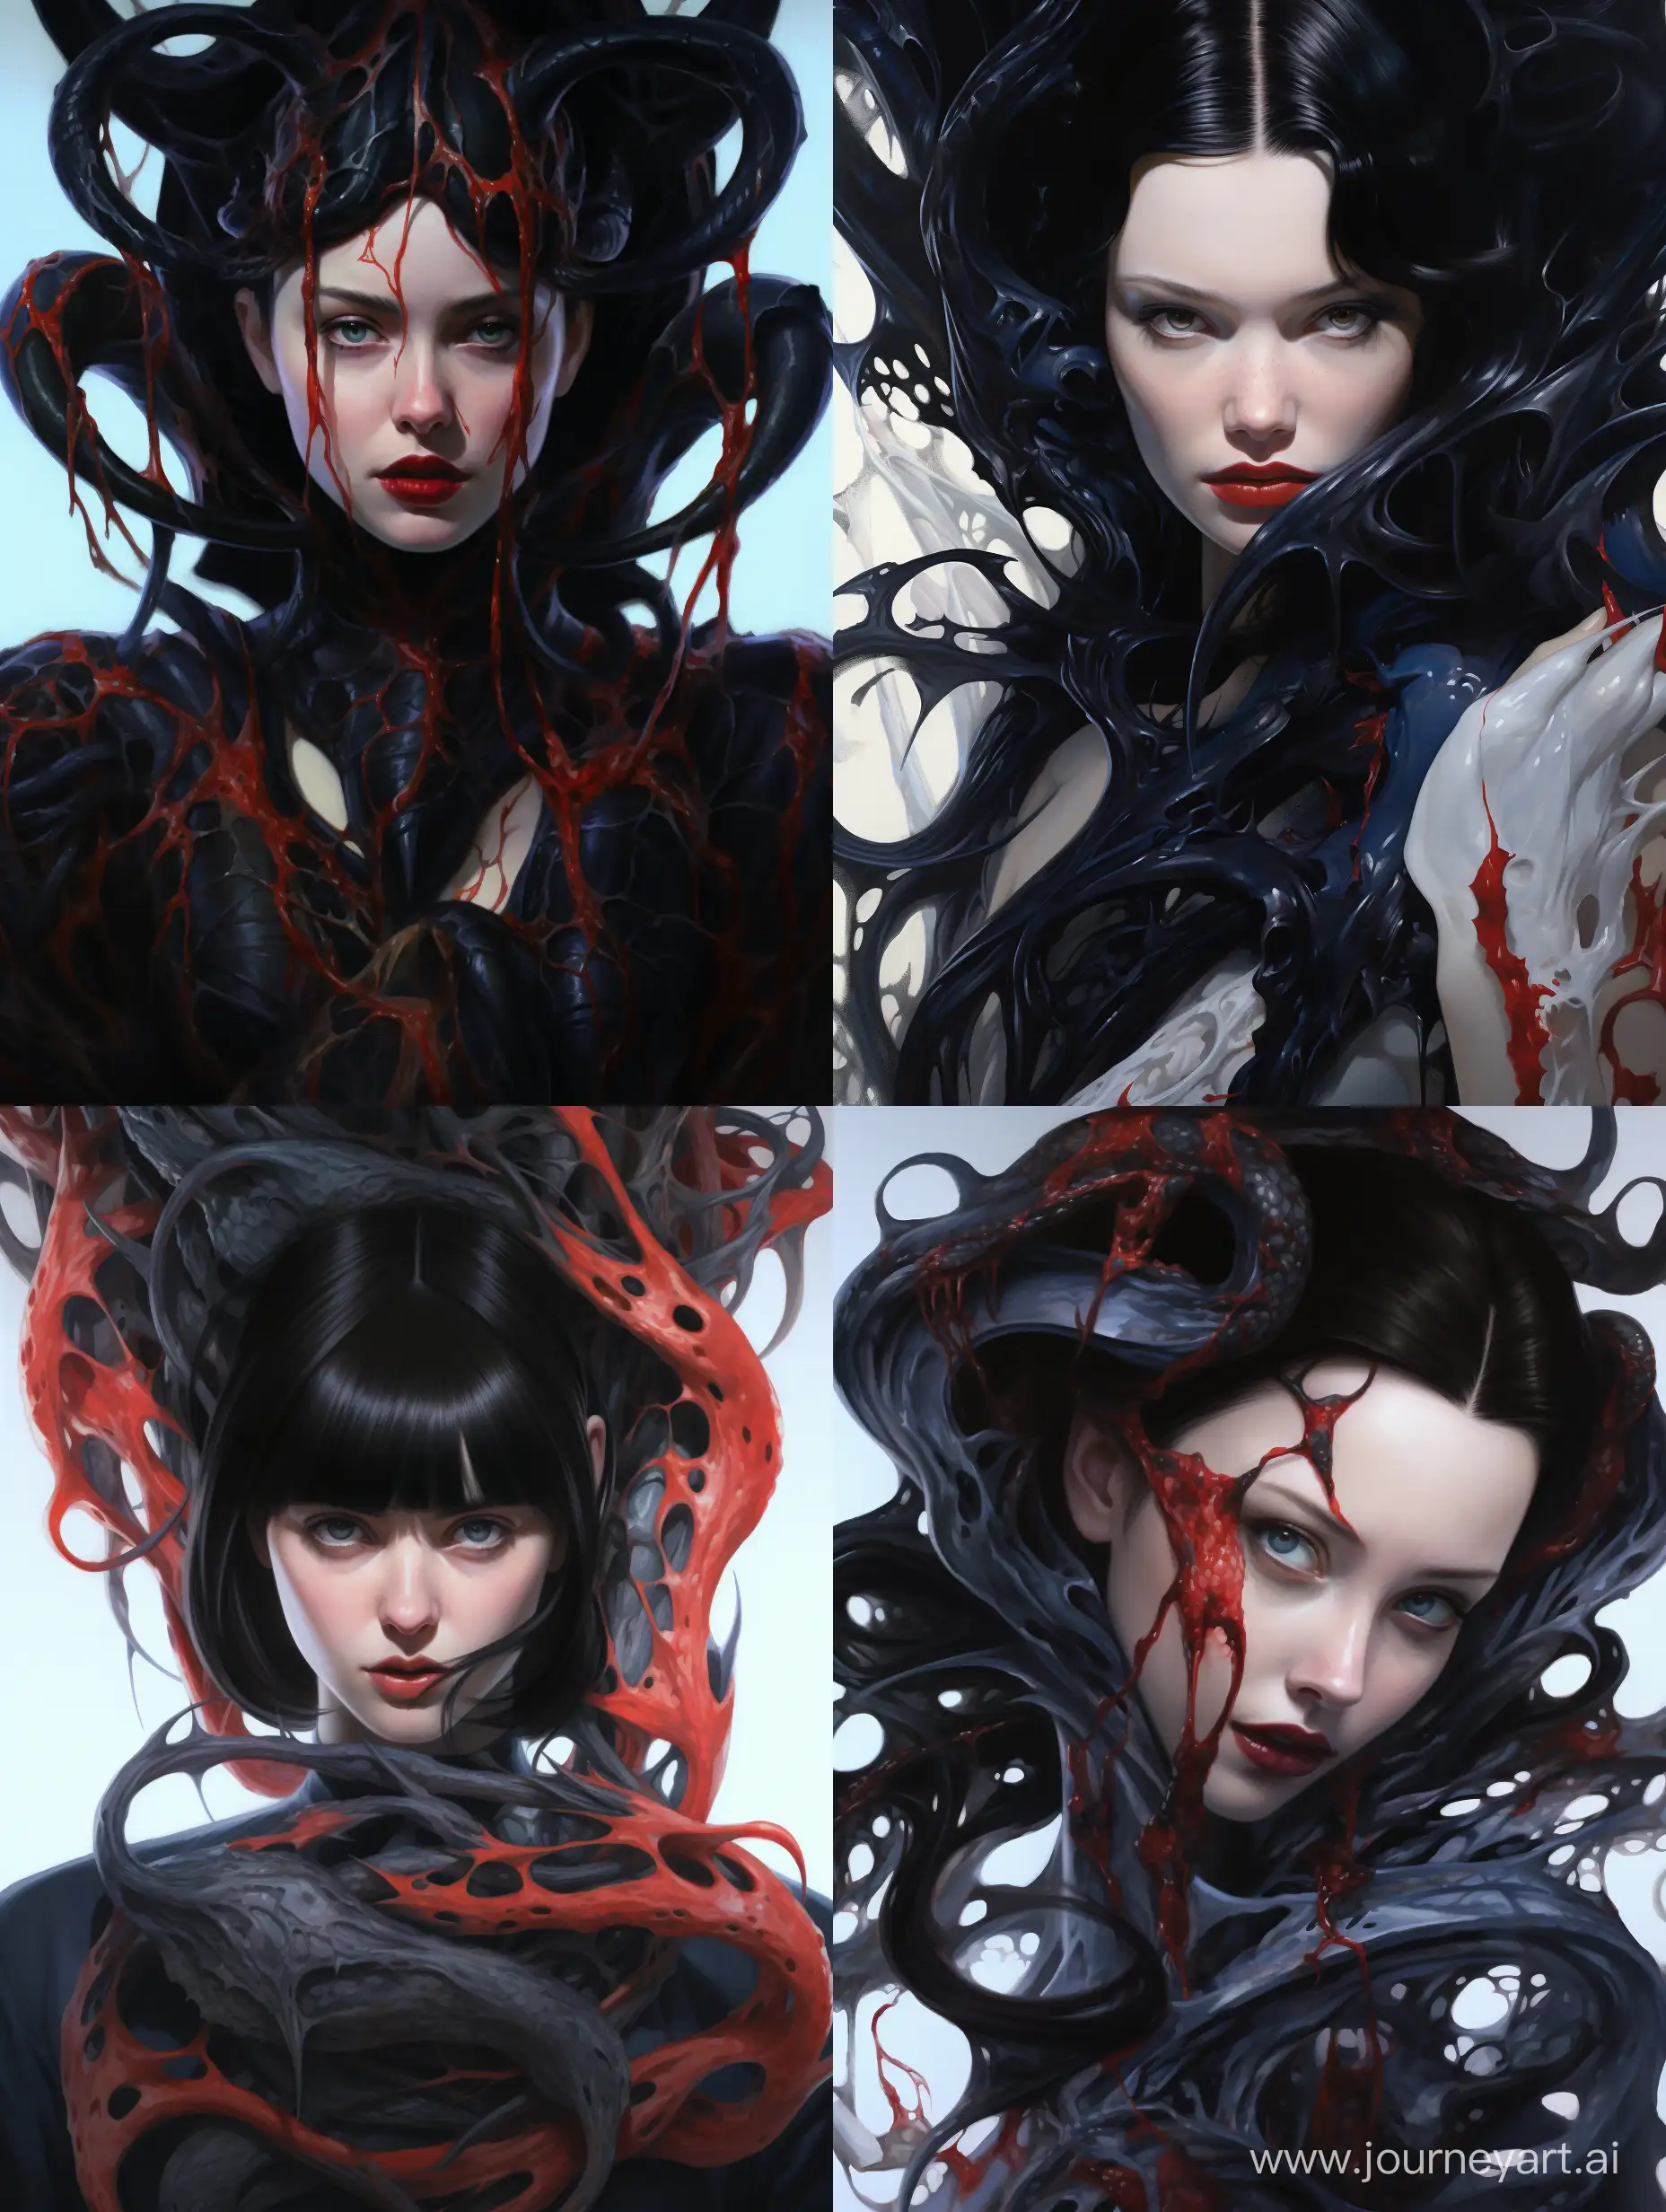 Snow-White-Merges-with-Venom-and-Carnage-Symbiotes-in-Hyperrealistic-Fusion-Art